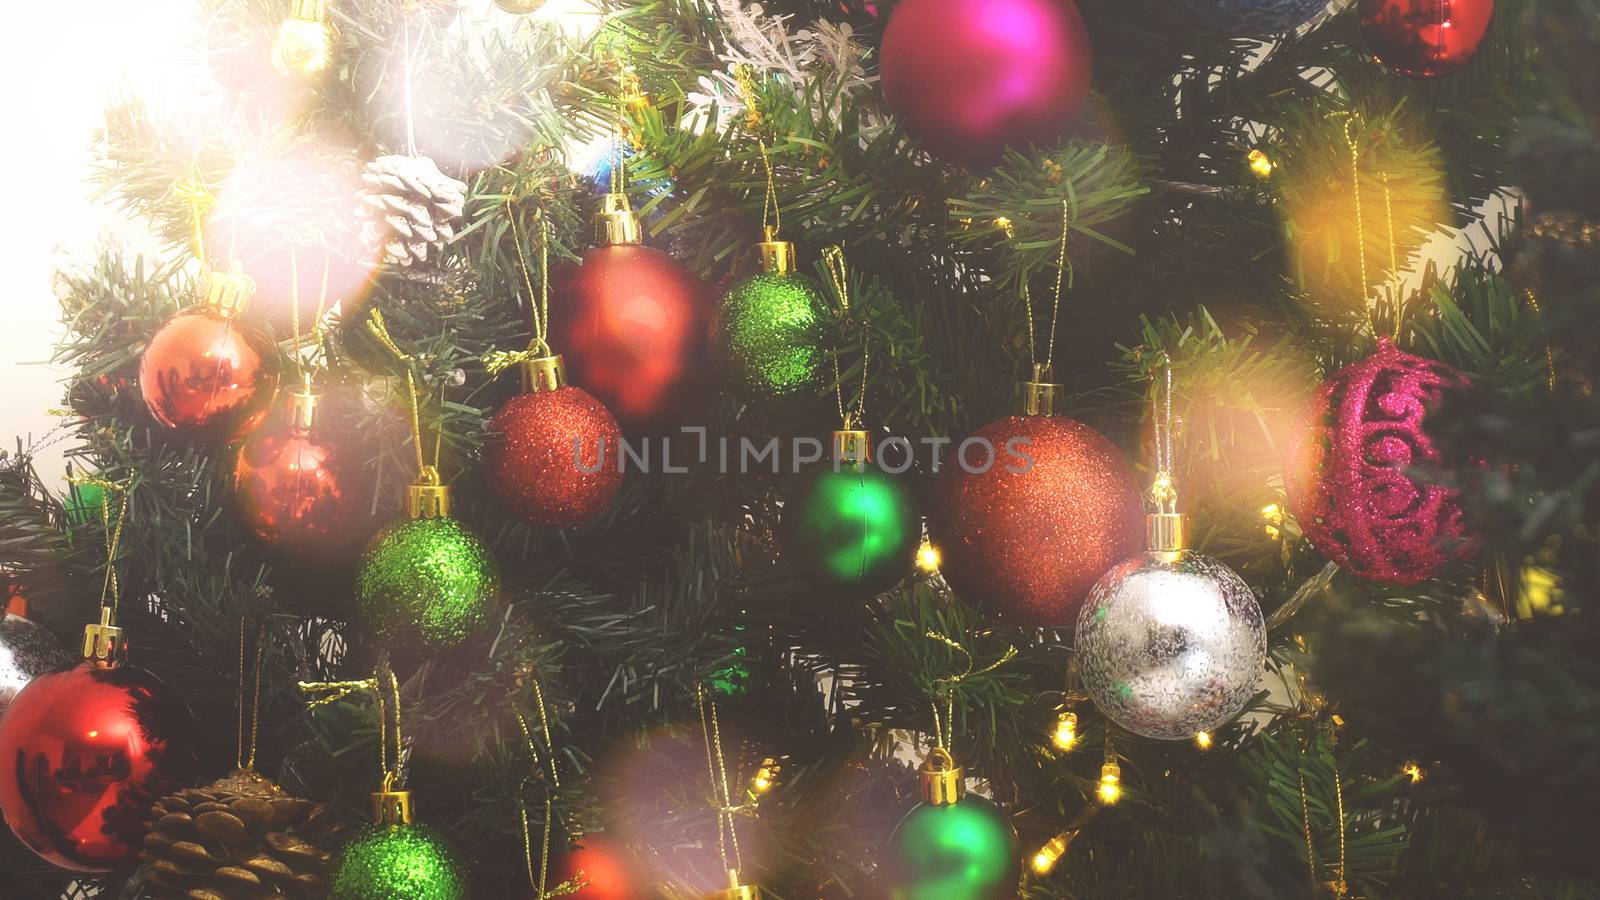 Greeting Season concept.close up of ornaments on a Christmas tree with decorative light